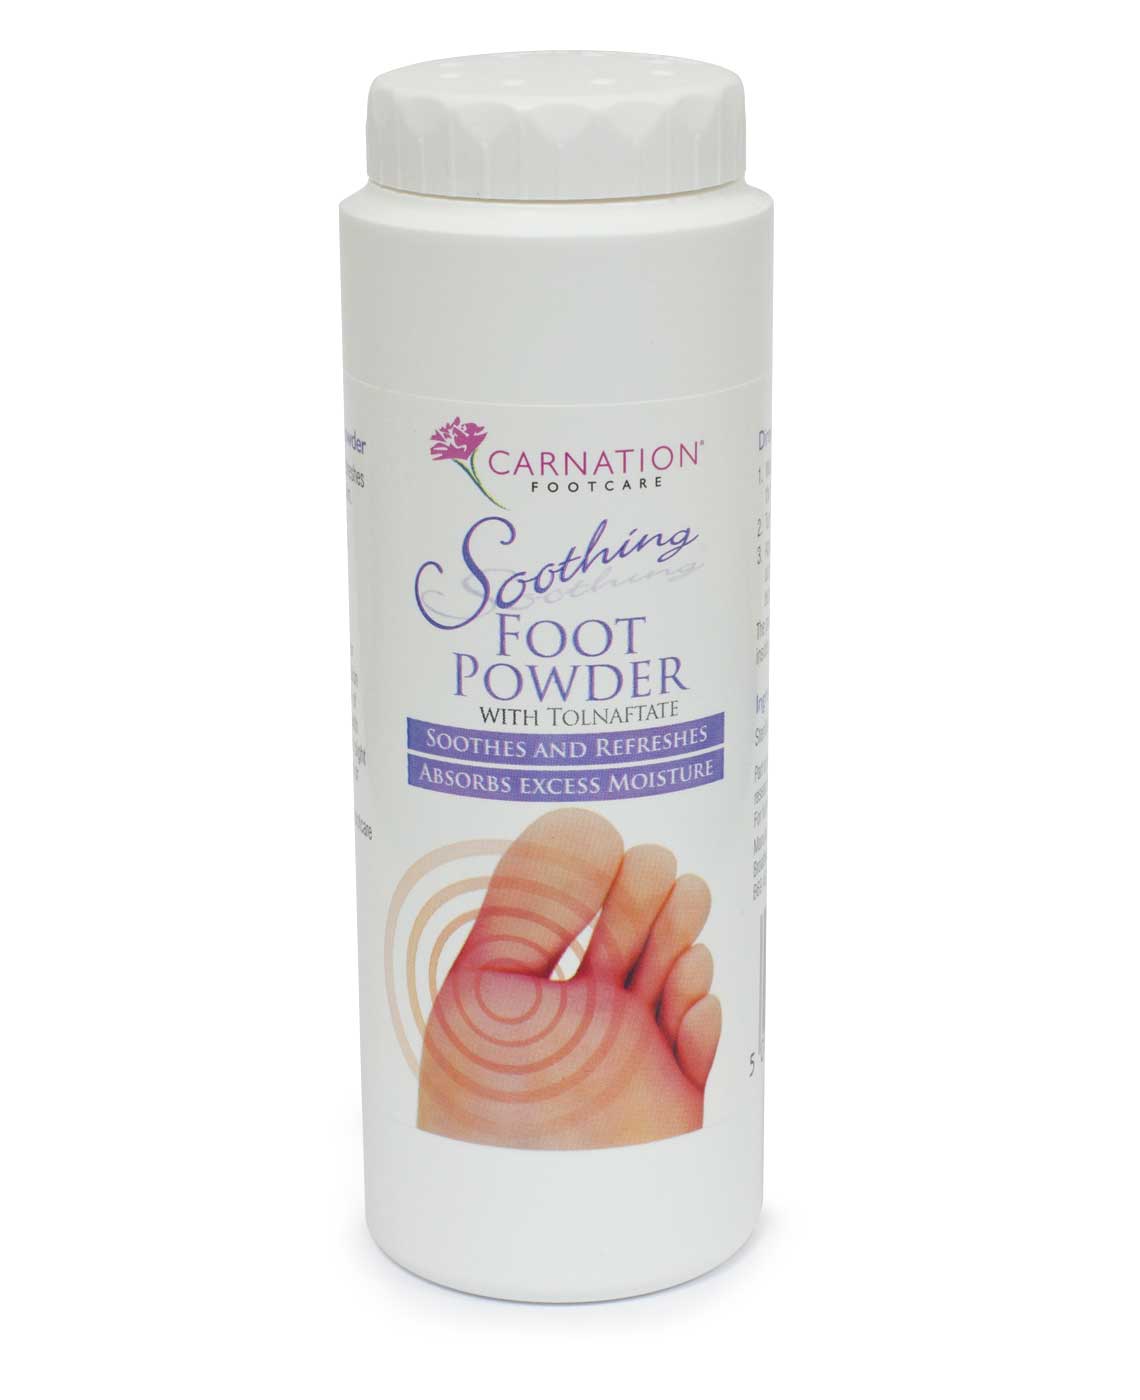 Carnation Soothing Foot Powder For Smelly Sweaty feet